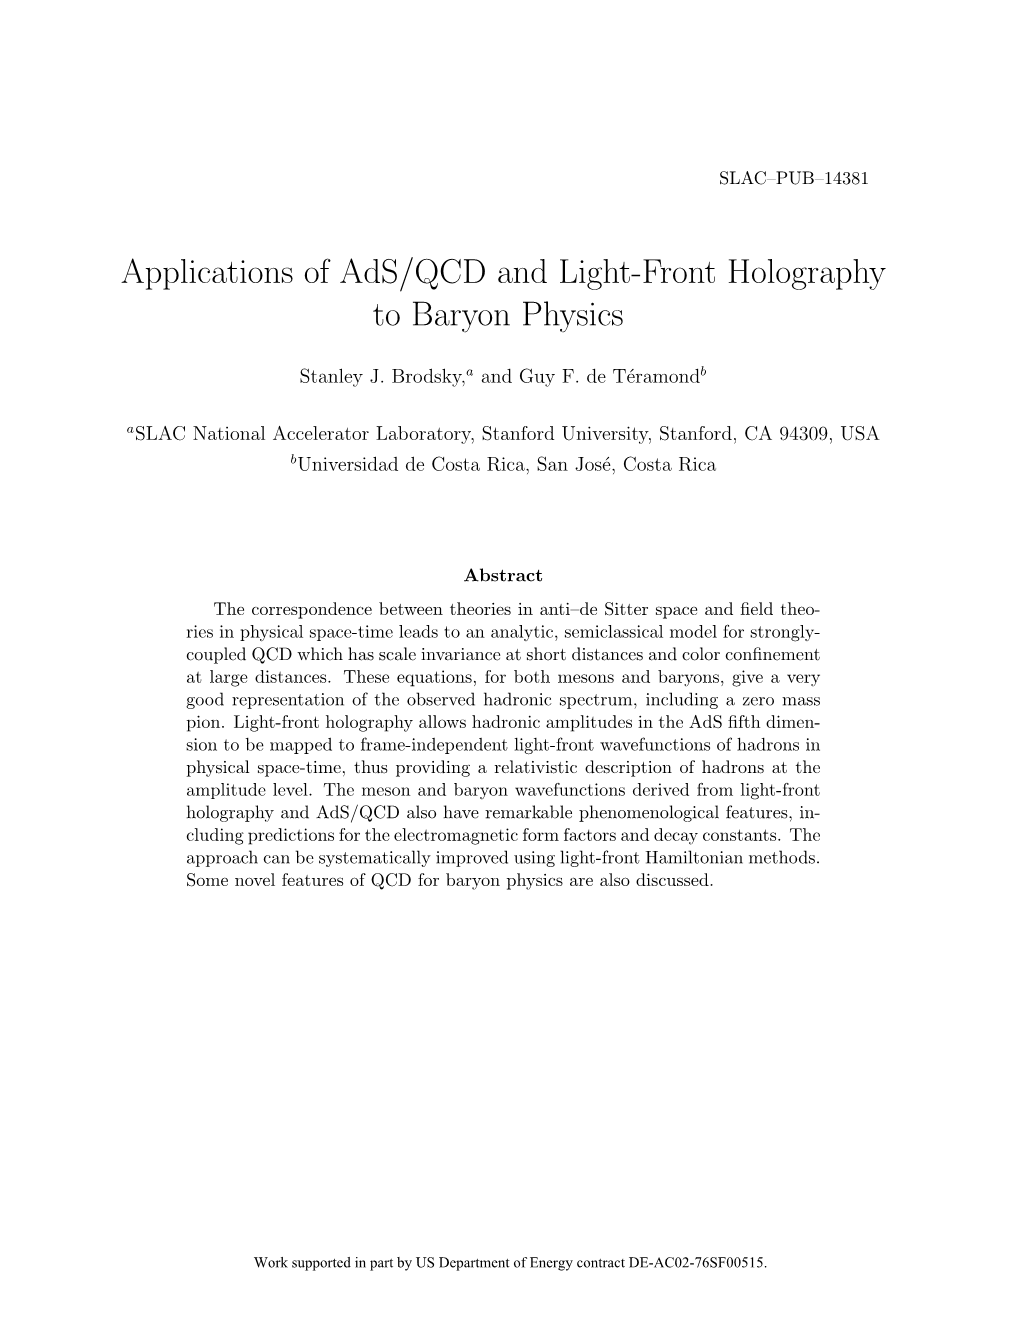 Applications of Ads/QCD and Light-Front Holography to Baryon Physics